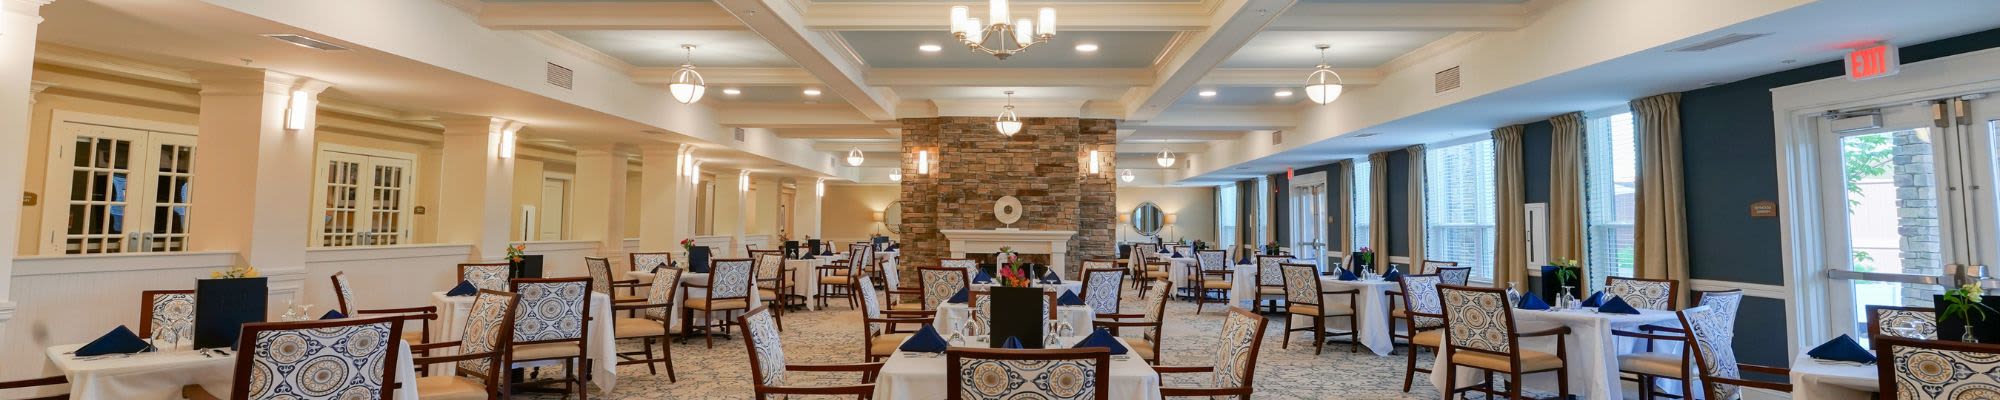 Dining at Harmony at Five Forks in Simpsonville, South Carolina